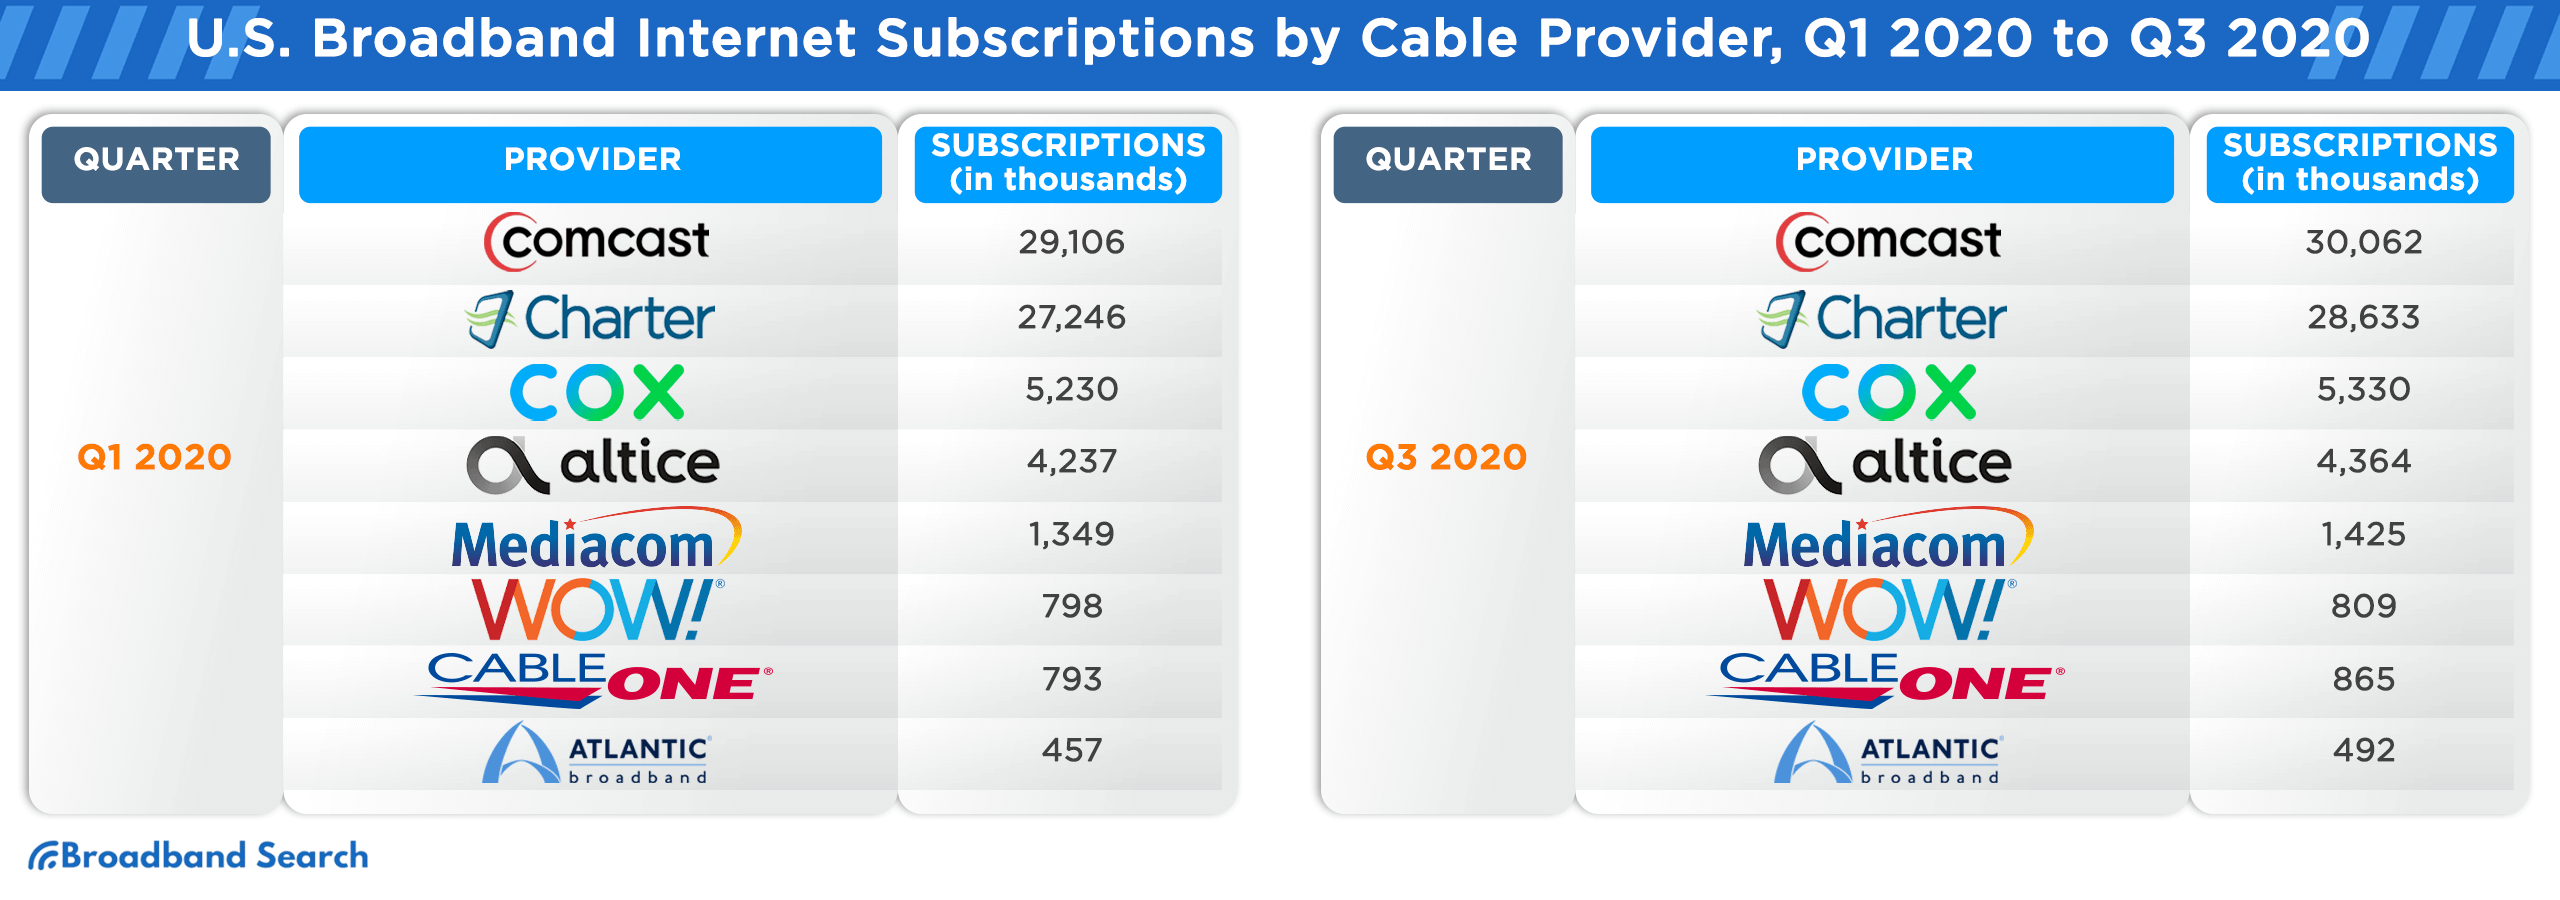 U.S. Broadband Internet Subscriptions by cable provider for quarter one to three of 2020